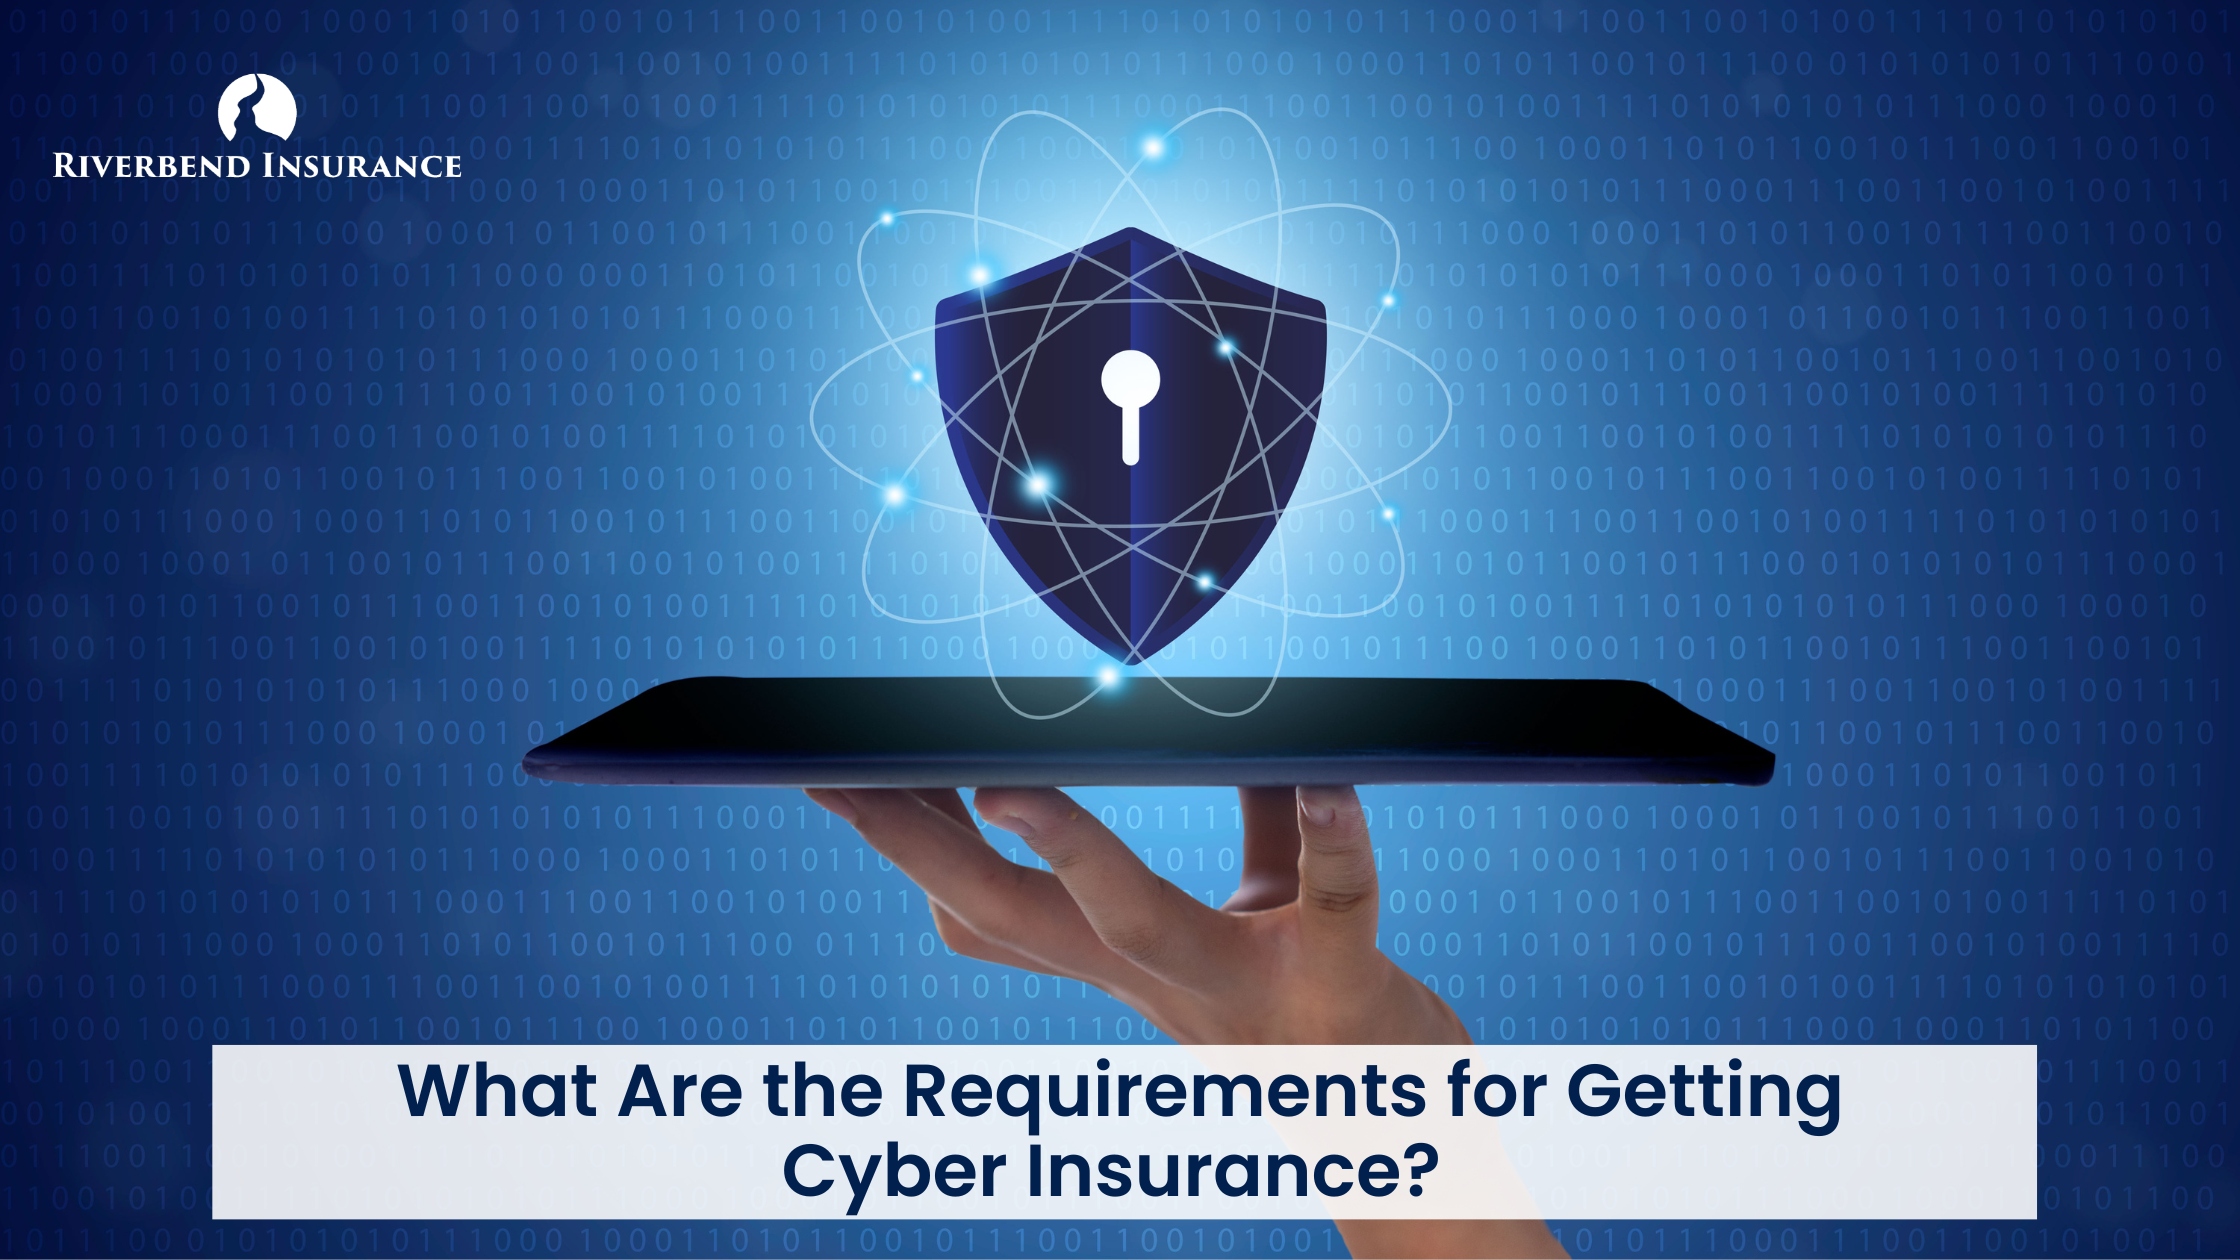 What Are the Requirements for Getting Cyber Insurance?